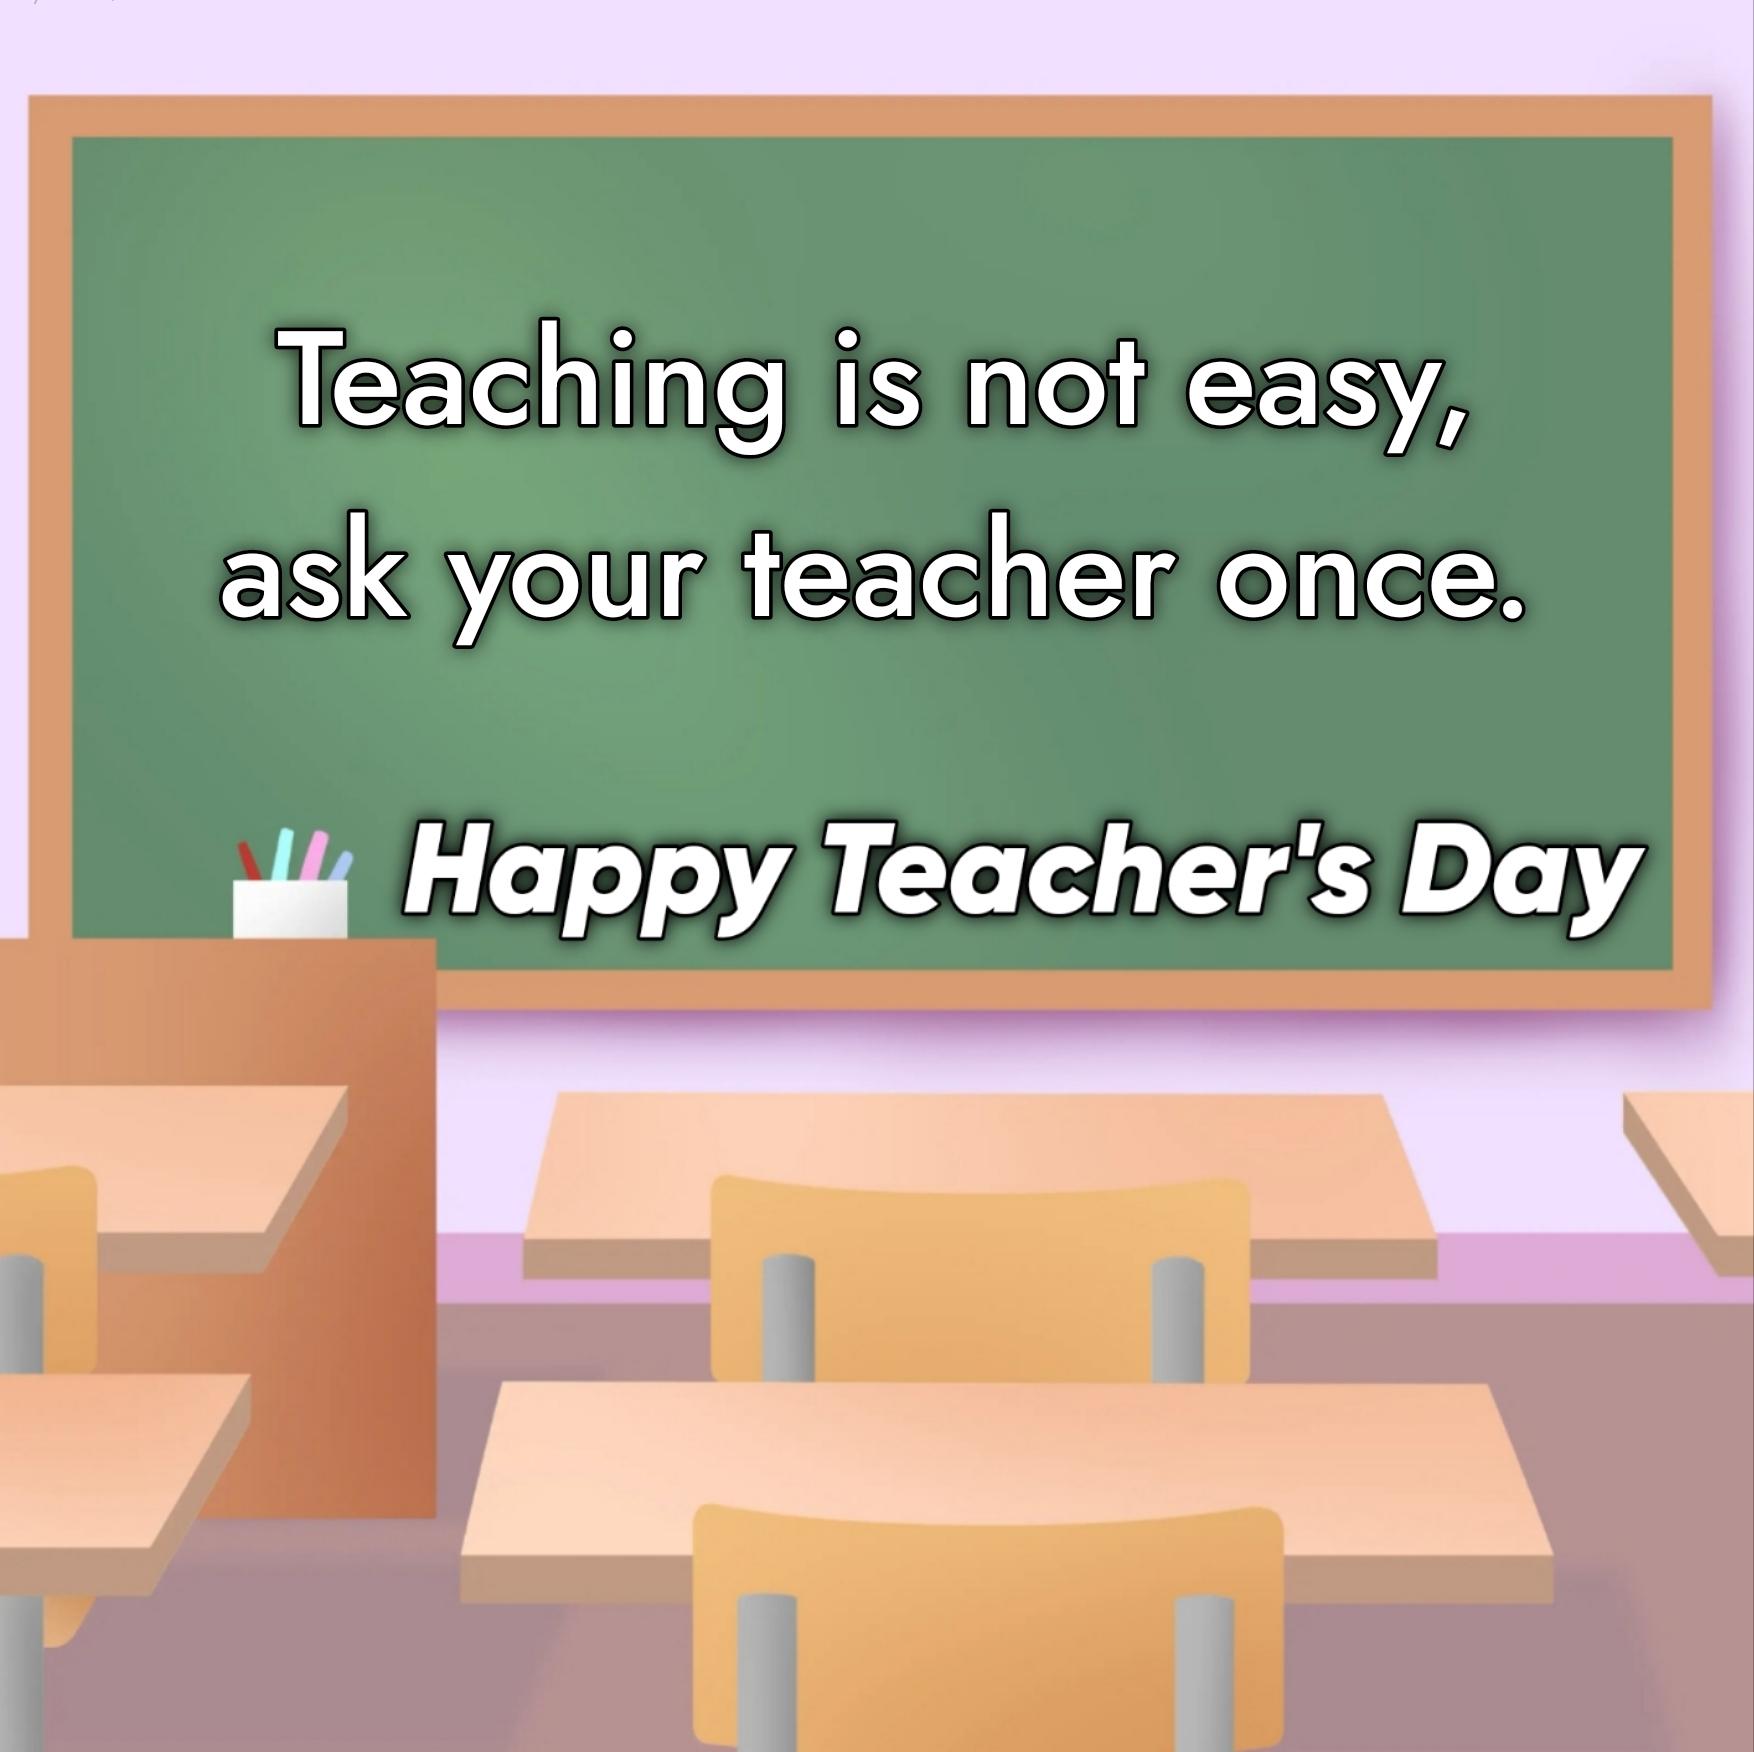 Teaching is not easy ask your teacher once